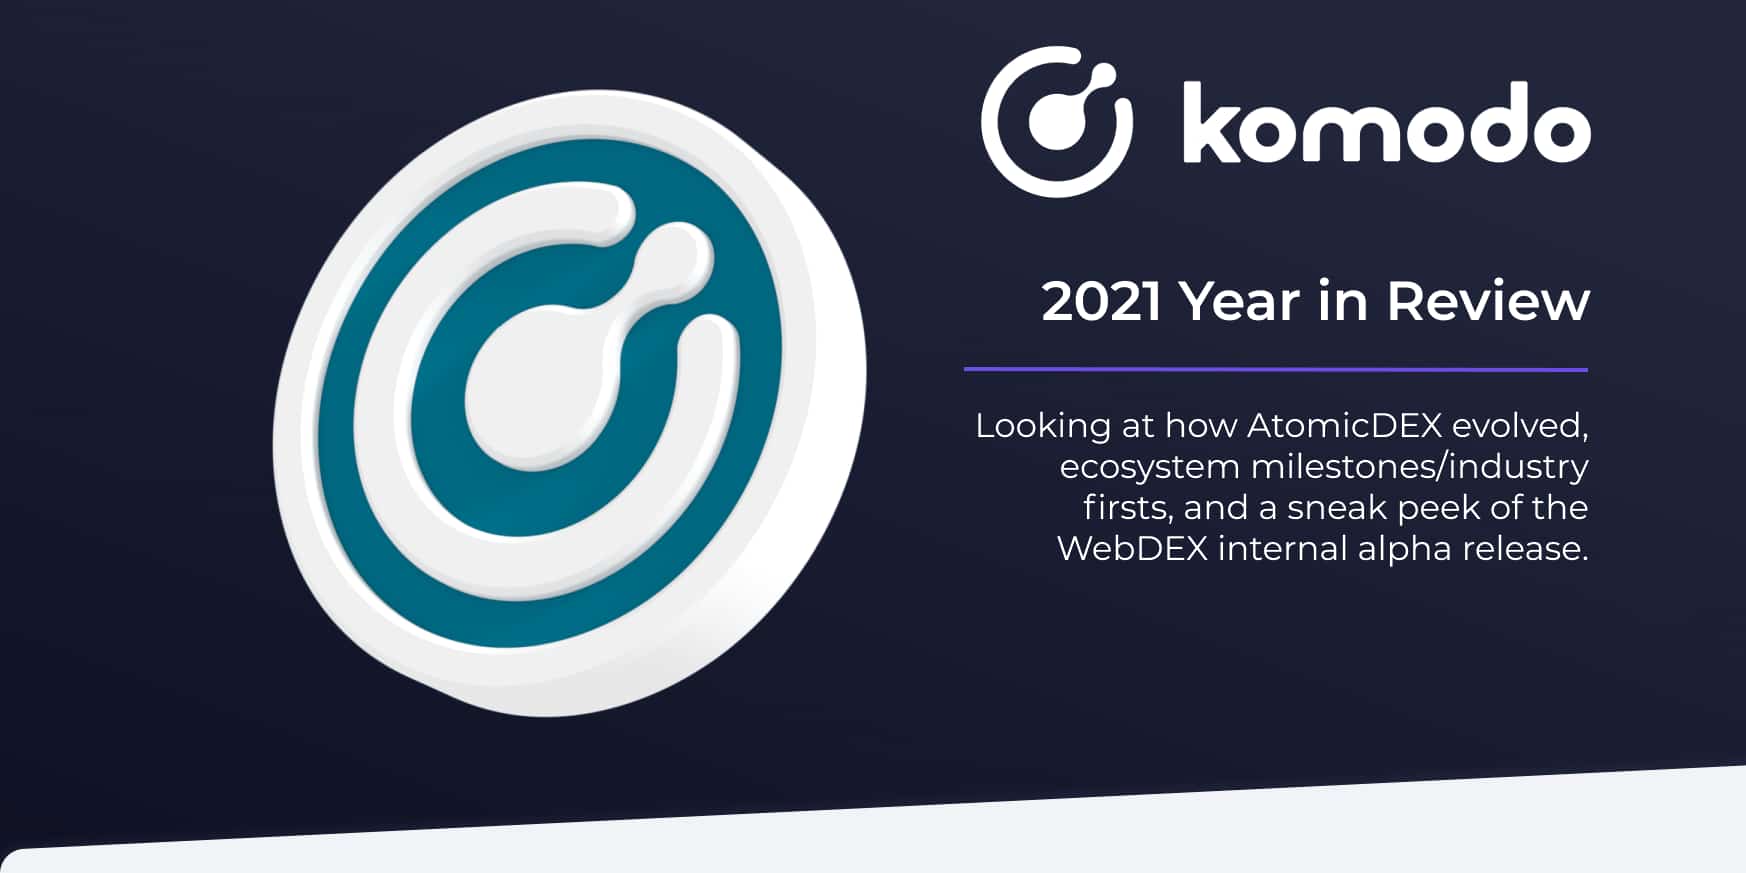 Komodo 2021 Year in Review